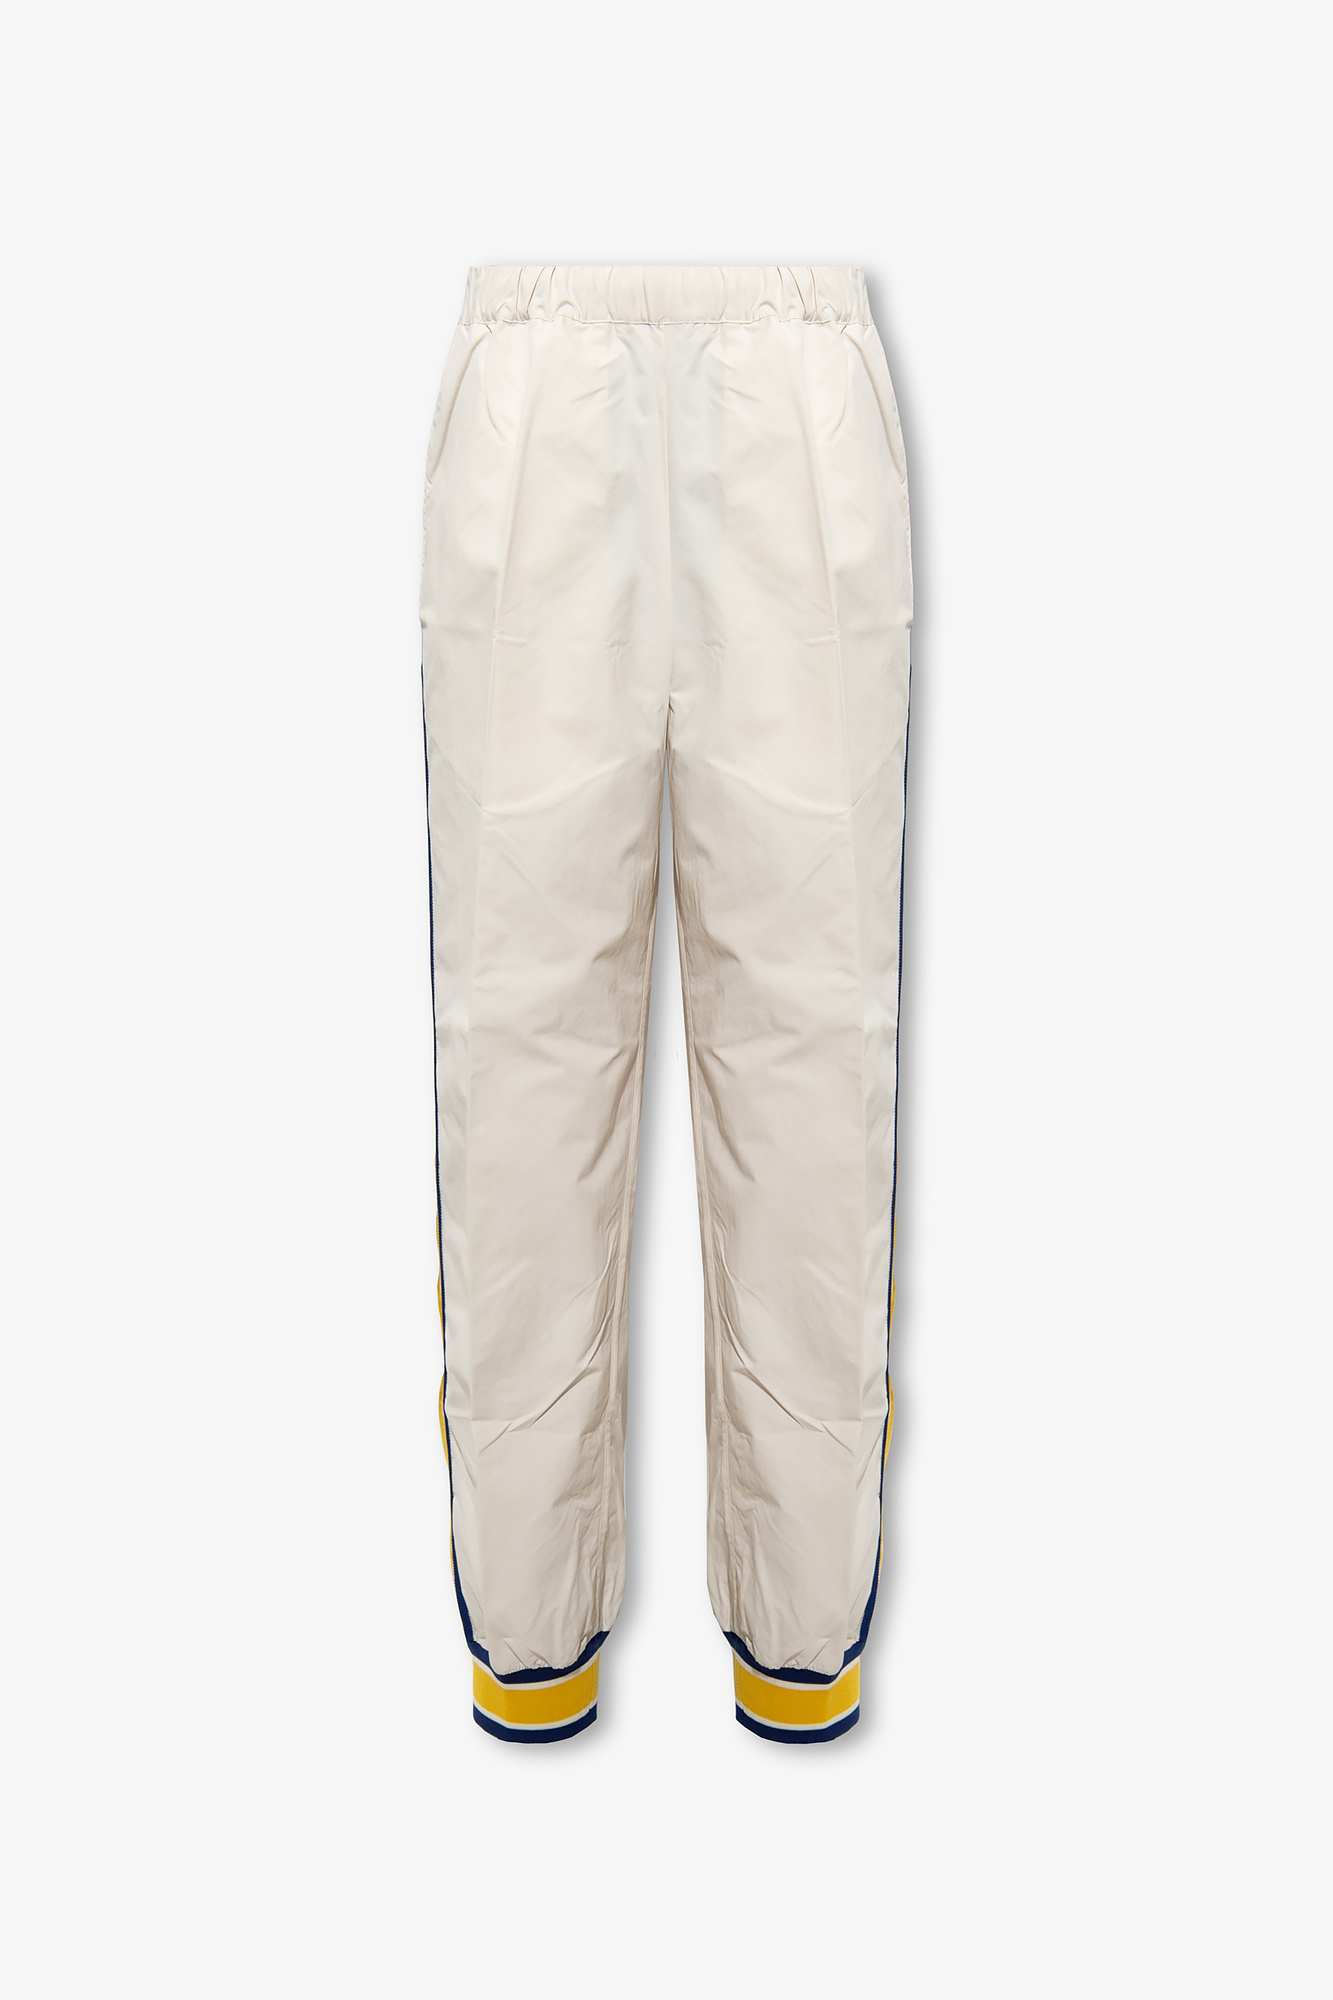 Gucci Cargo trousers, Men's Clothing